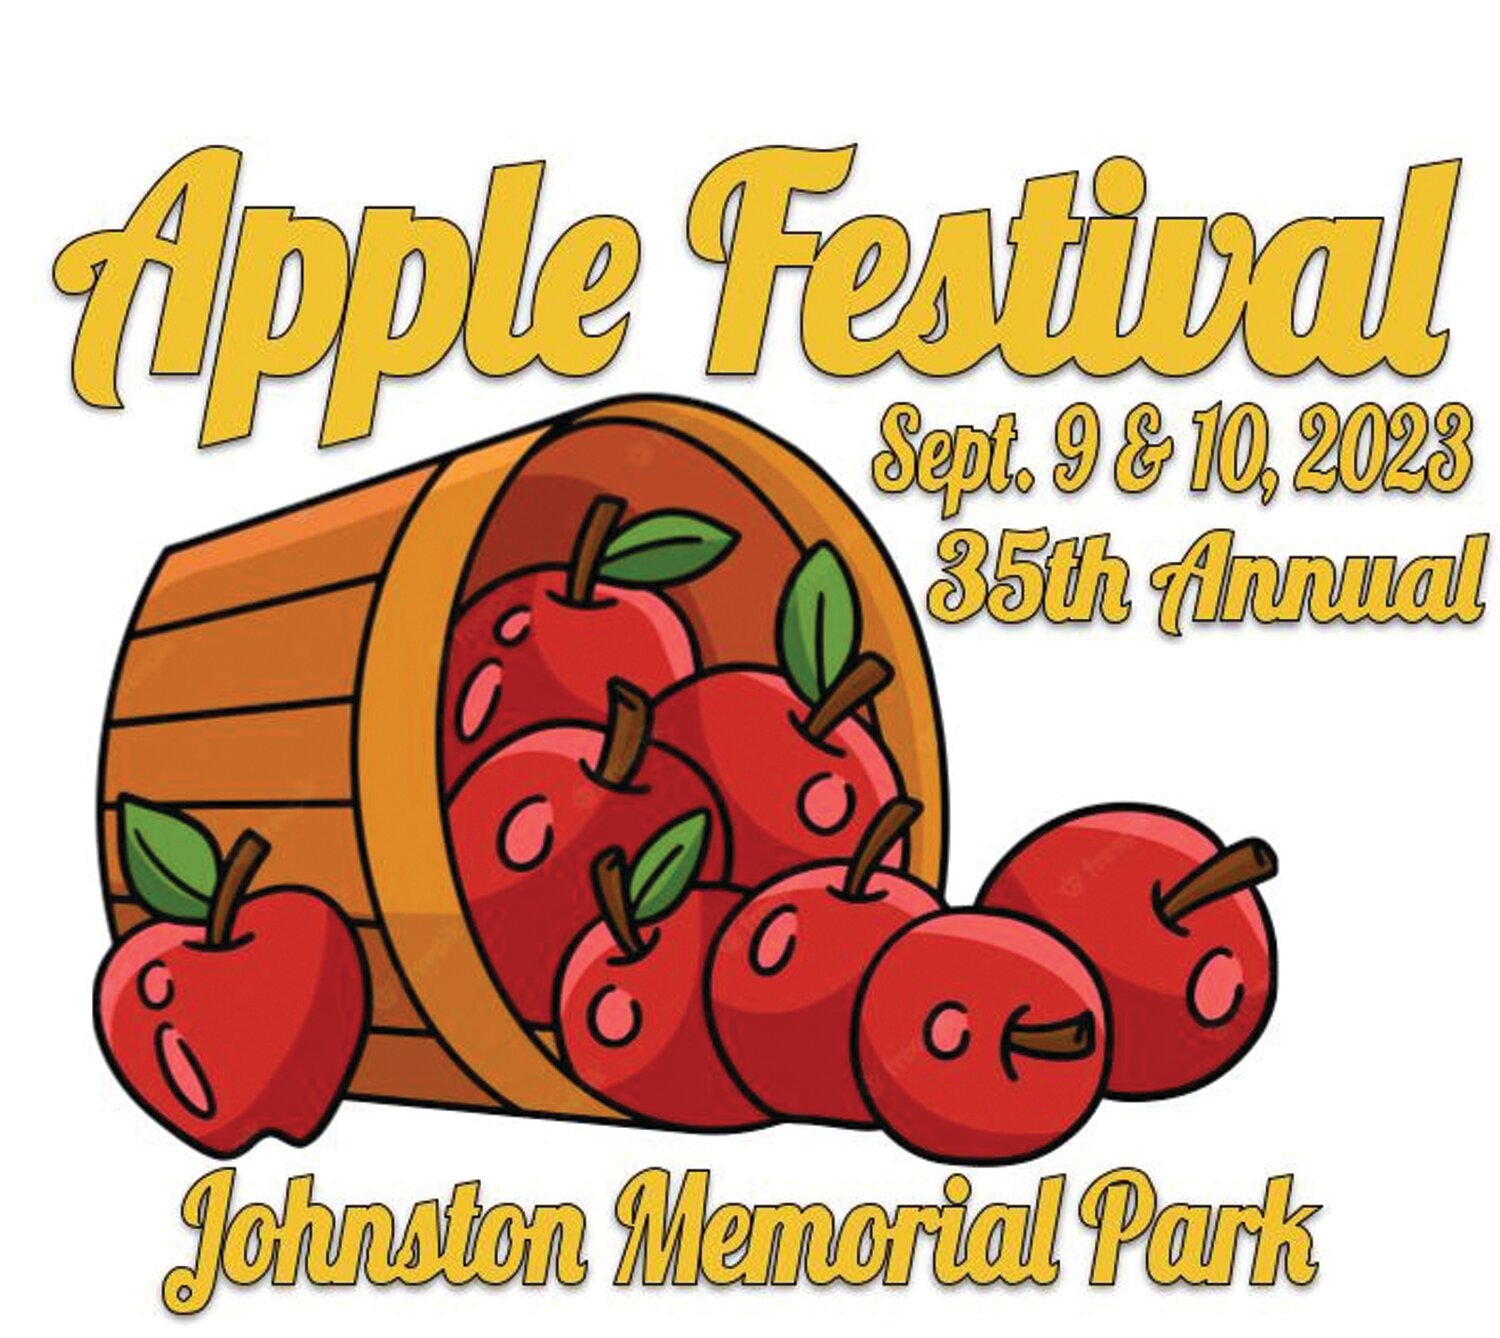 AN APPLE A YEAR, AT LEAST: On the weekend of Sept. 9 and 10, the 35th Annual Apple Festival will return to Johnston’s Memorial Park. This year, the sponsoring orchard has new owners and the entire festival has a new organizer, Rhode Island Events LLC.